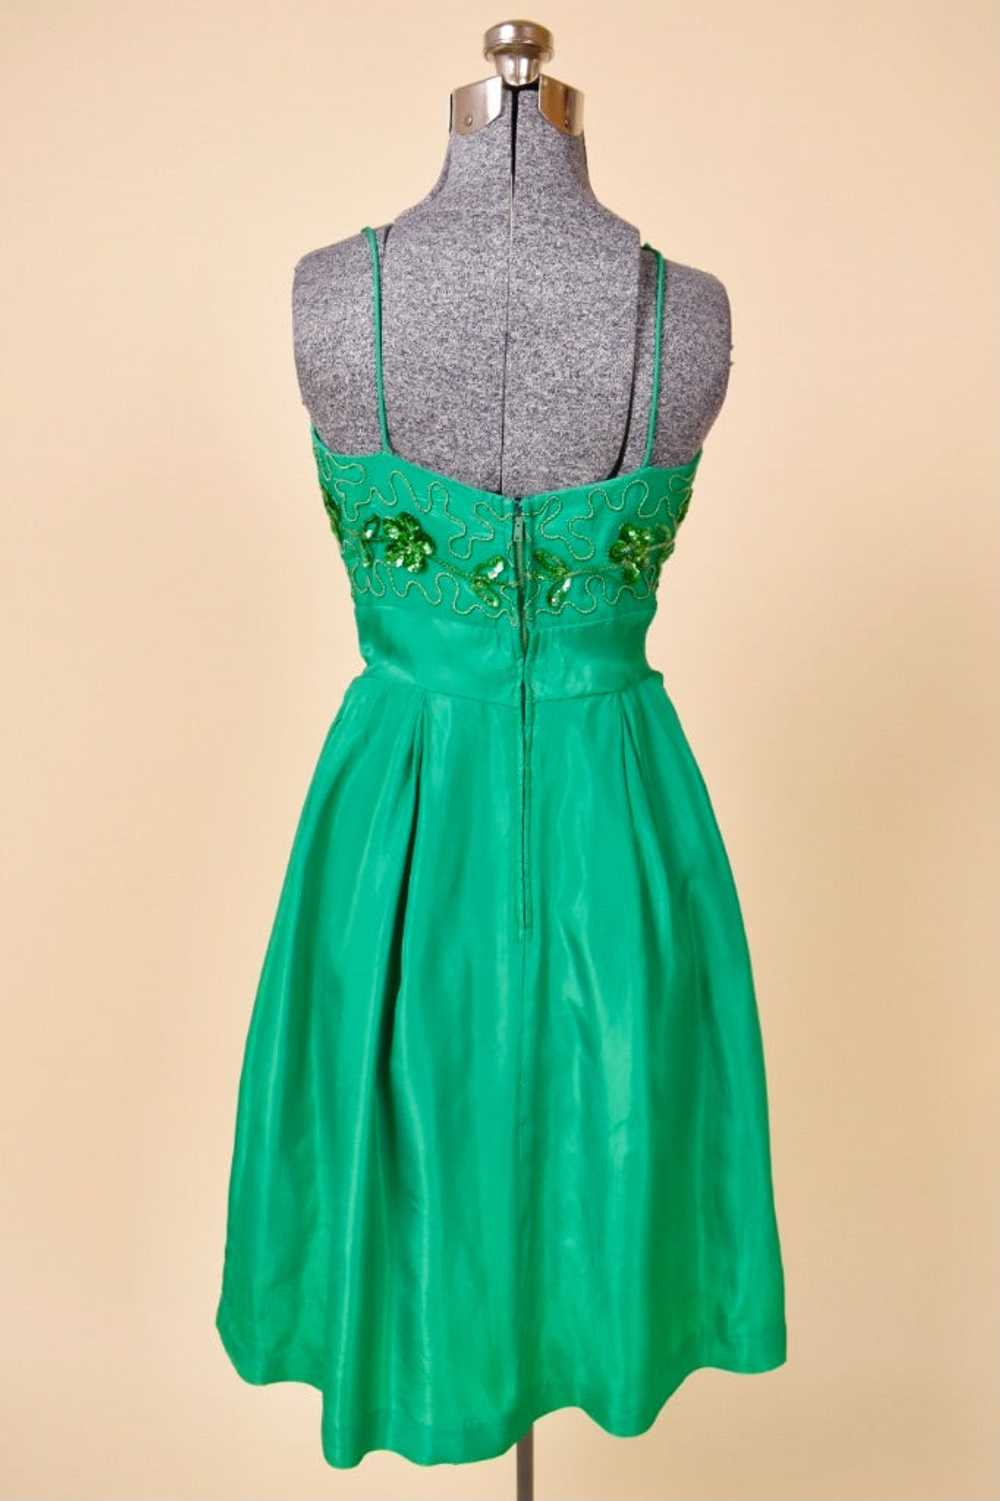 Green 60s Party Dress with Sequin Flowers, XS - image 3